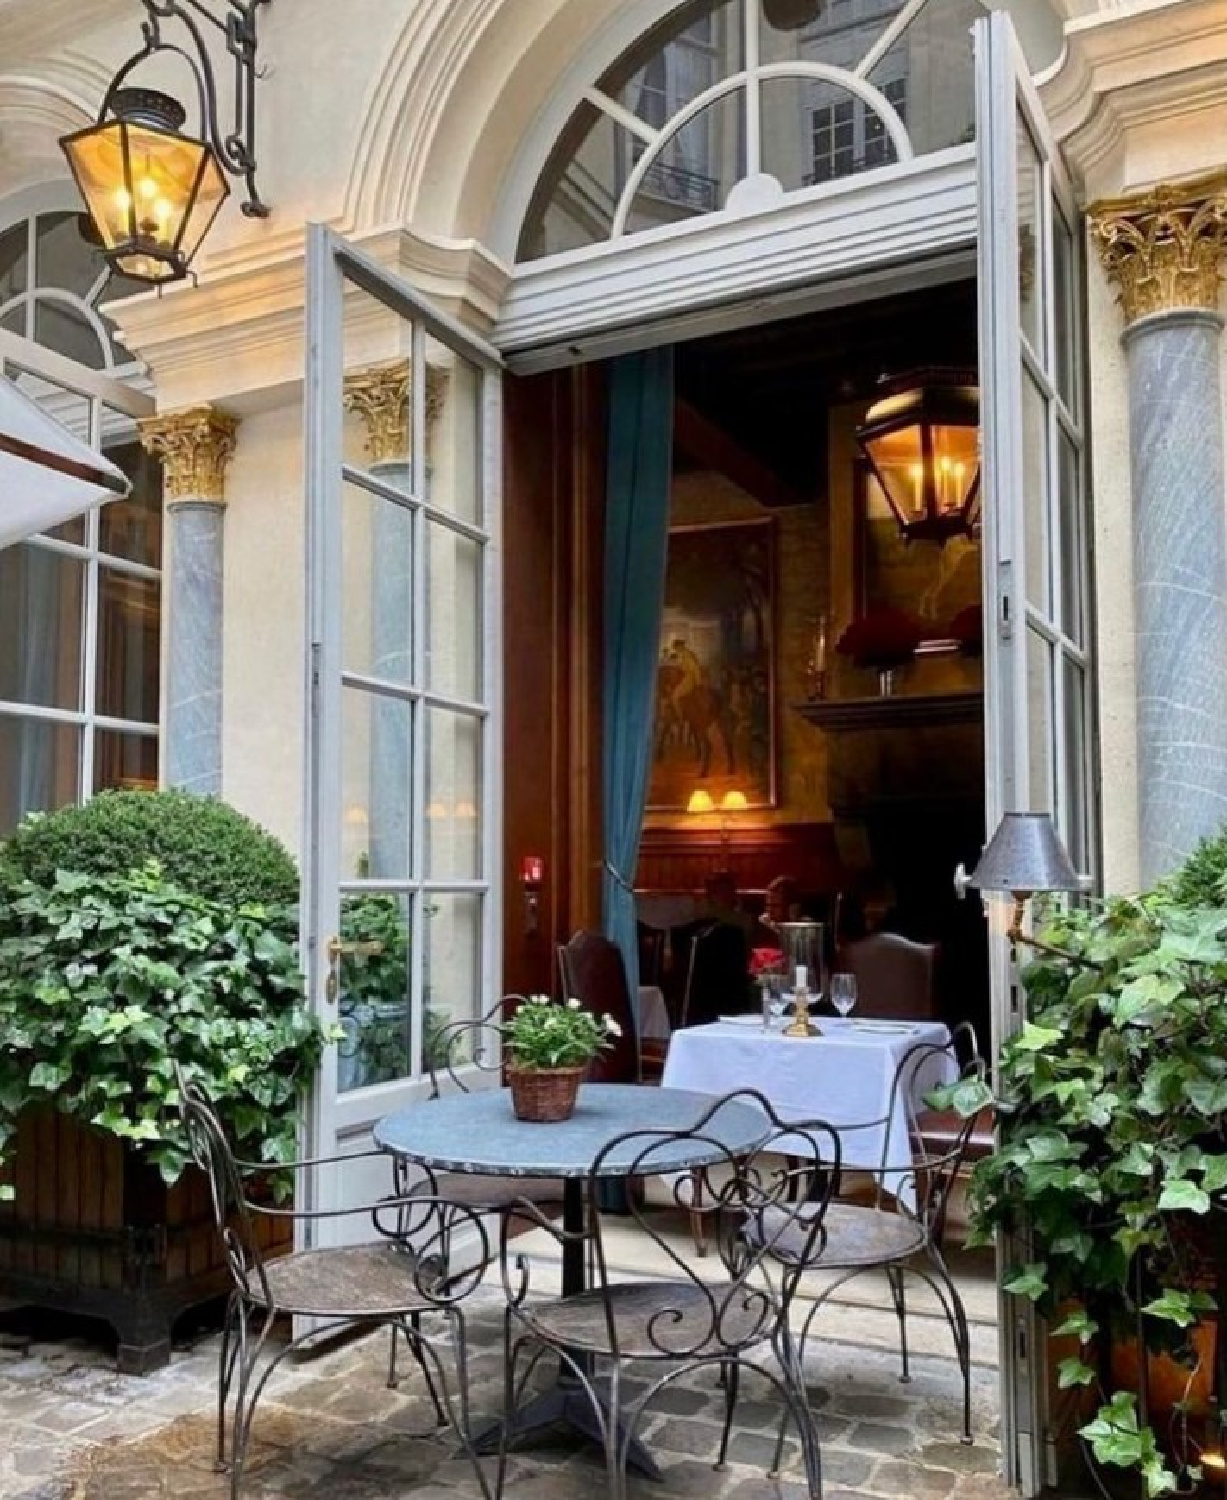 Enchanting and romantic outdoor dining in a courtyard - @ralphlauren. #courtyarddining #romanticdining #ralphlauren